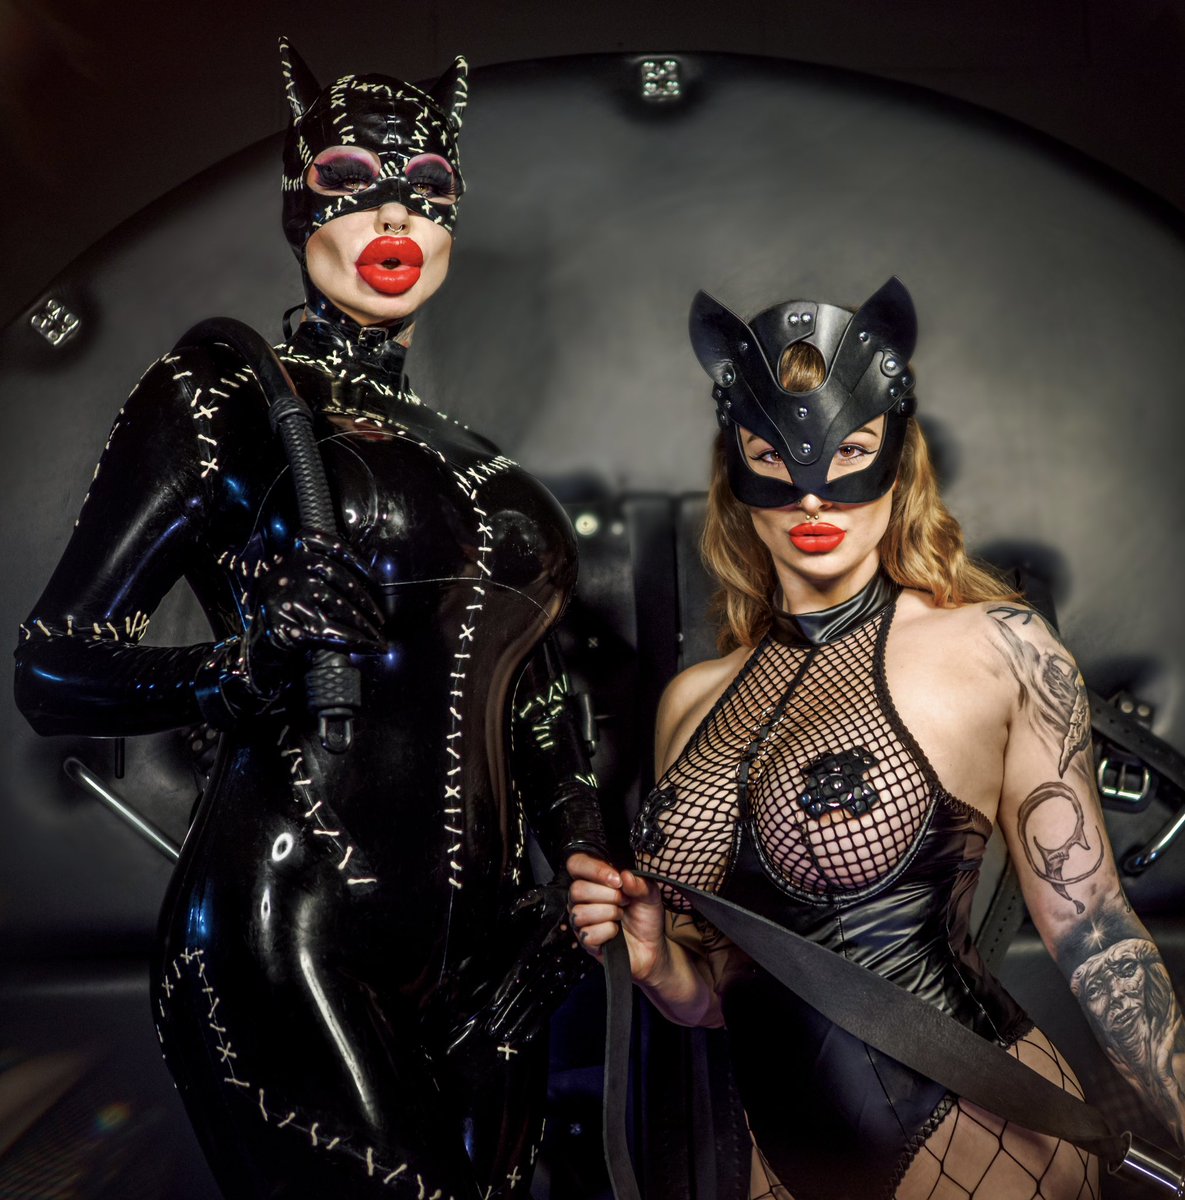 Mommy, Mommy, Meow, Meow! Retweet because you love our outfits. 🐈‍⬛ @kittyink.wildatheart instagram 🐈‍⬛ with the one and only @frankinsella @Murdermiles #catmask #leatherfashion #latexfashion #blacklatex #lingeriefashion